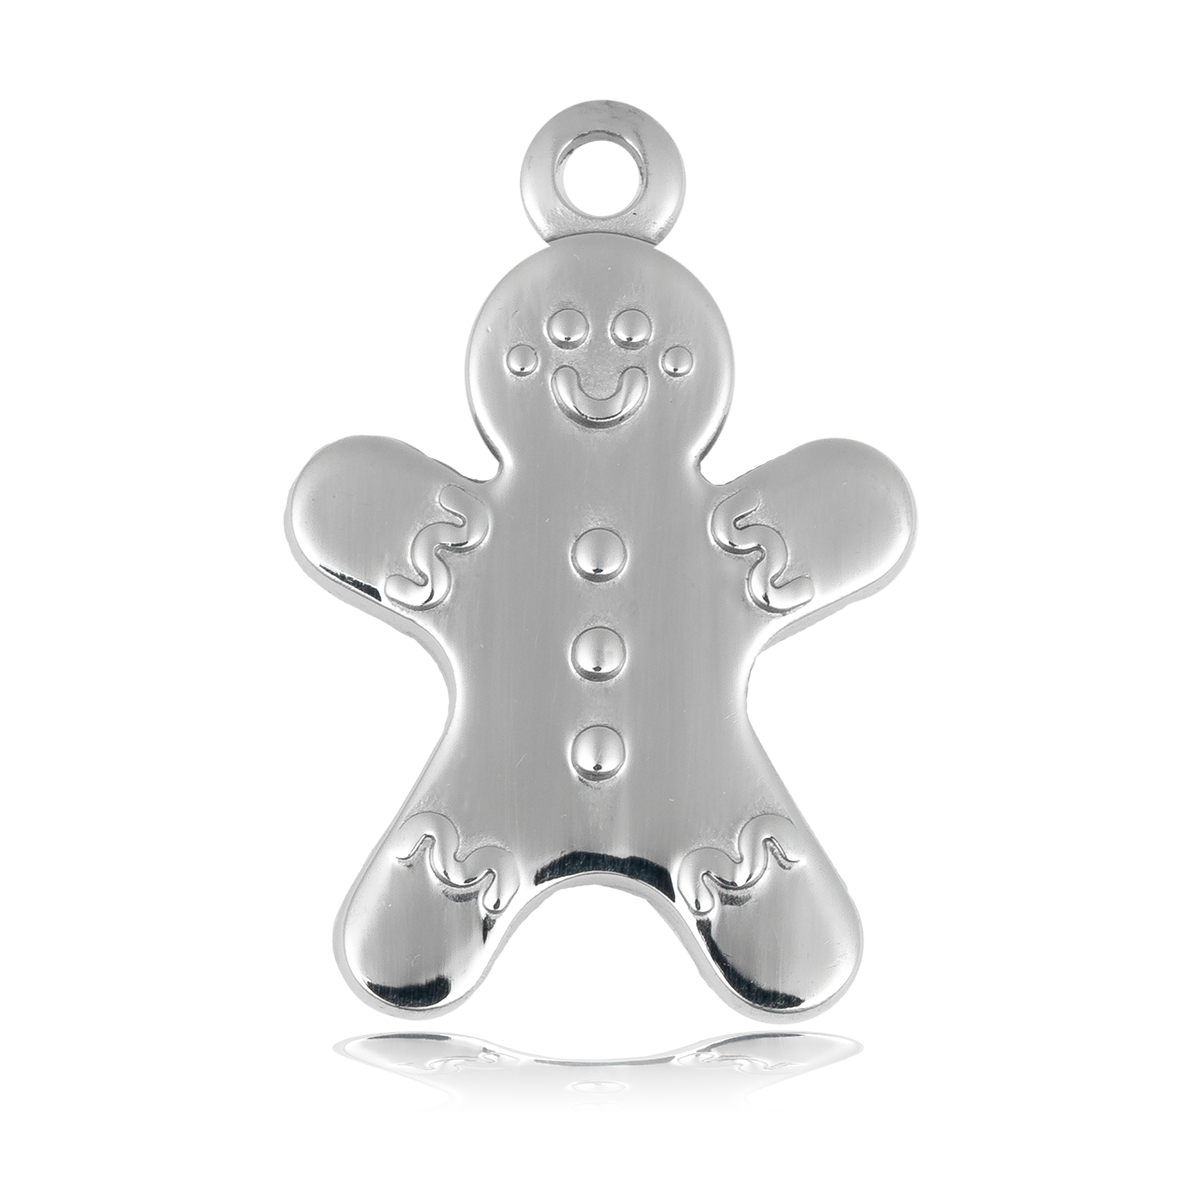 HELP by TJ Gingerbread Man Charm with Light Blue Agate Charity Bracelet